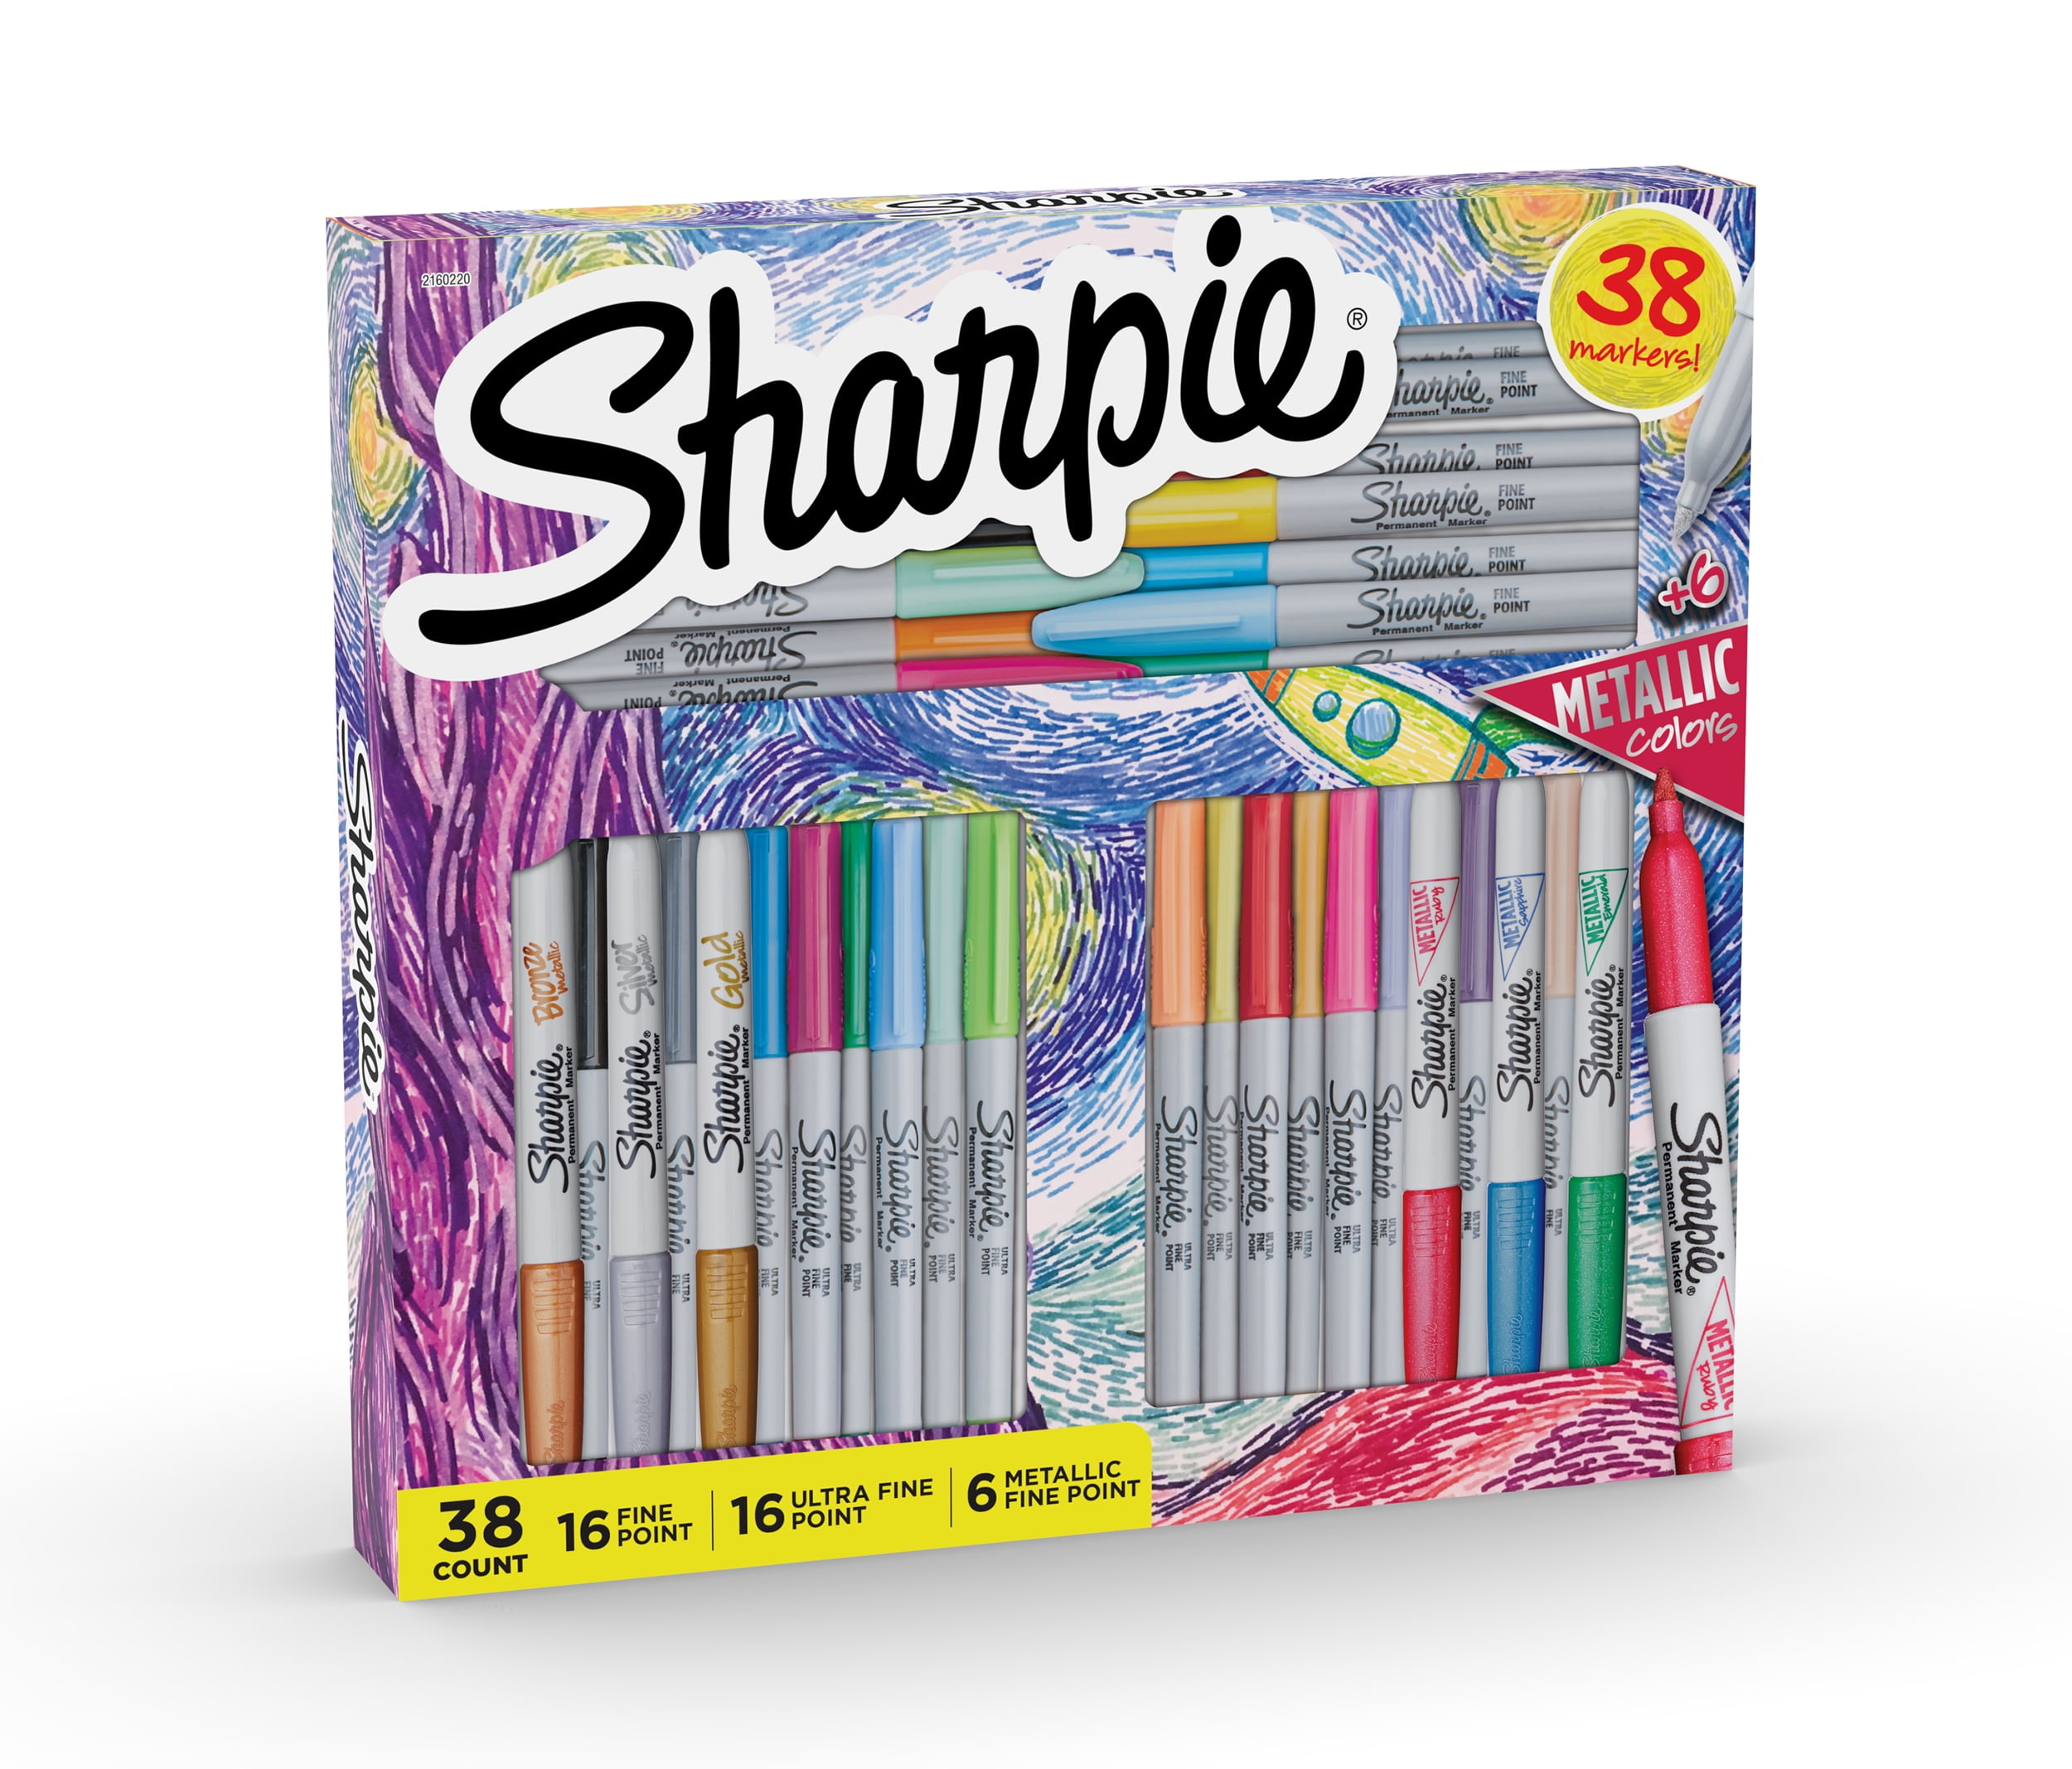 Sharpie Limited Edition Holiday Set Permanent Marker Mixed Pack 40-count,  Metallic Chisel, Metallic Fine, Ultra Fine Point, Fine Point.